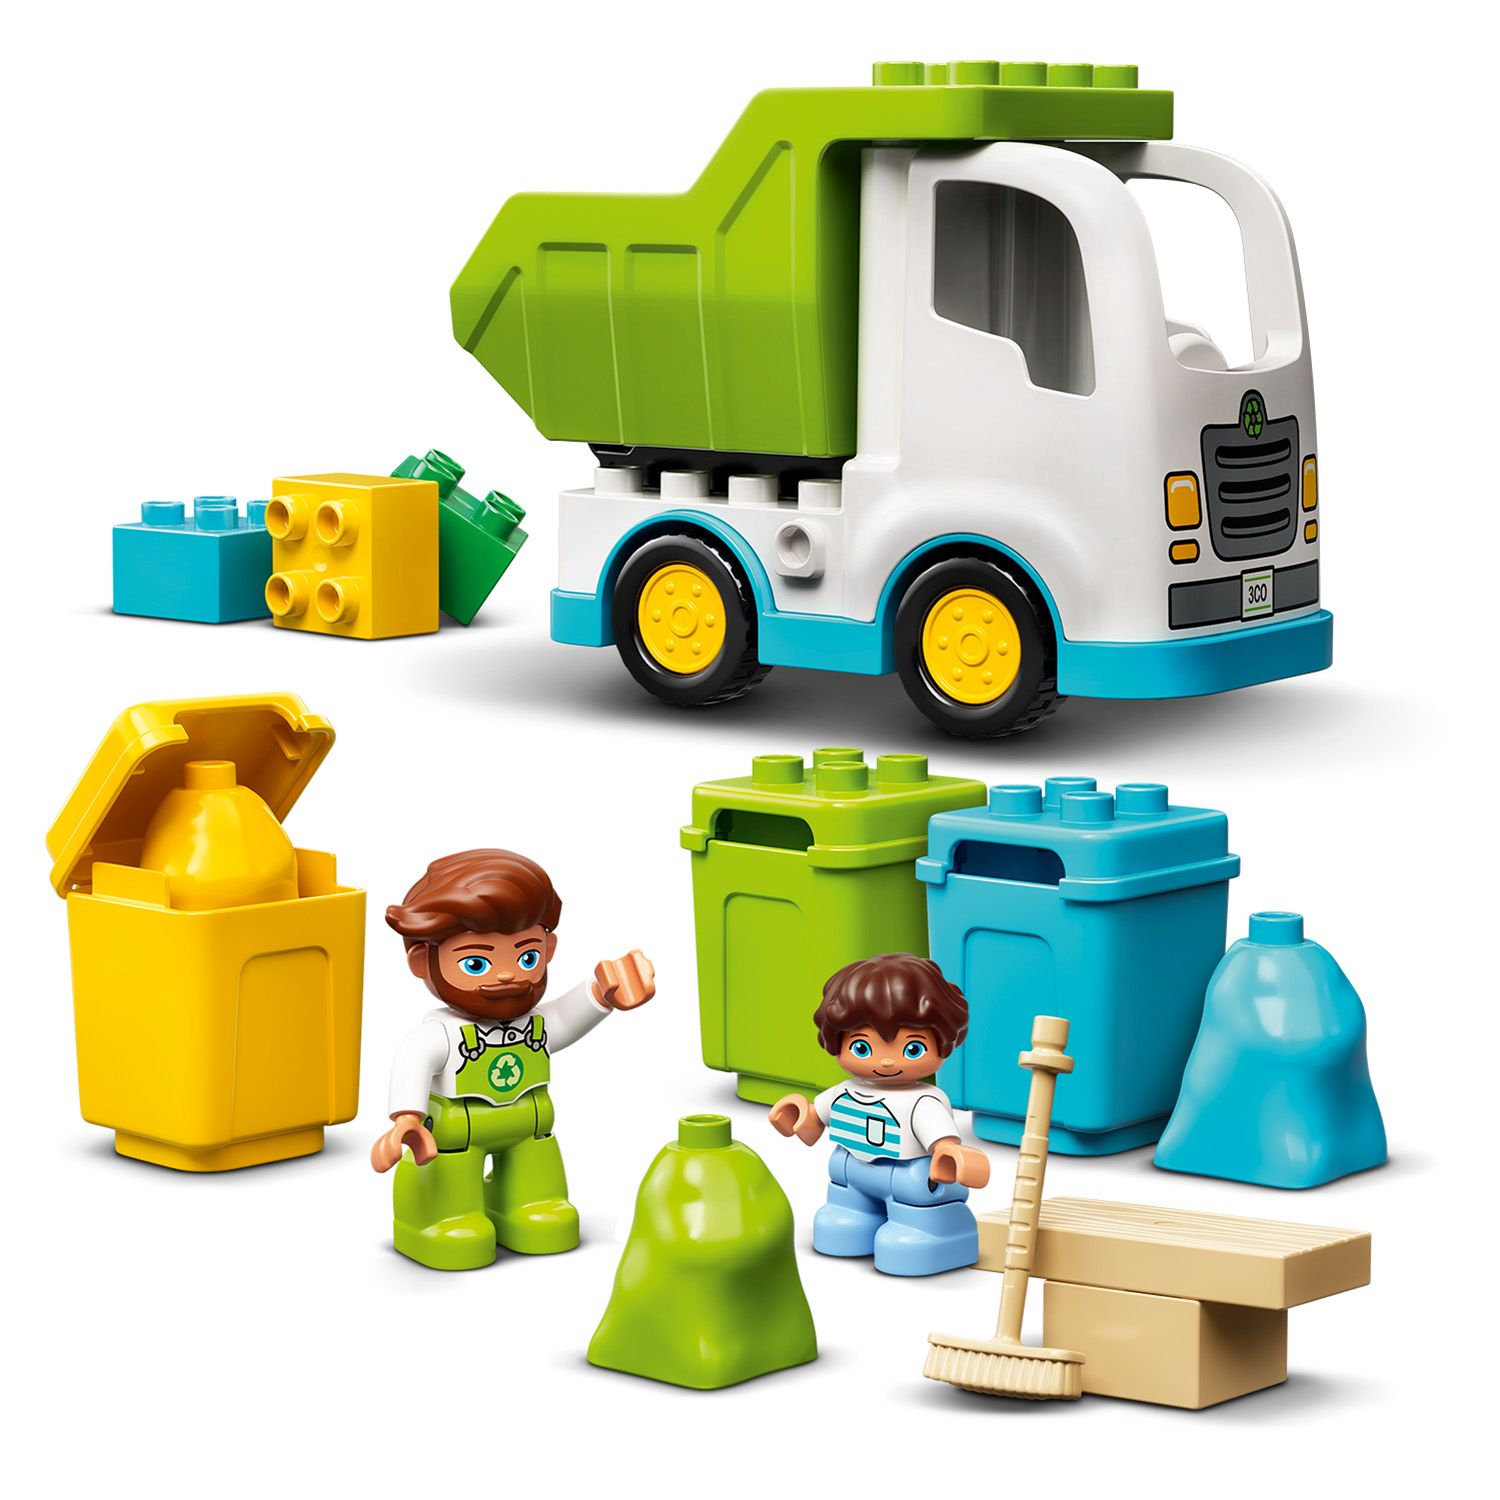 Recycling lorry and colour-sorting bins